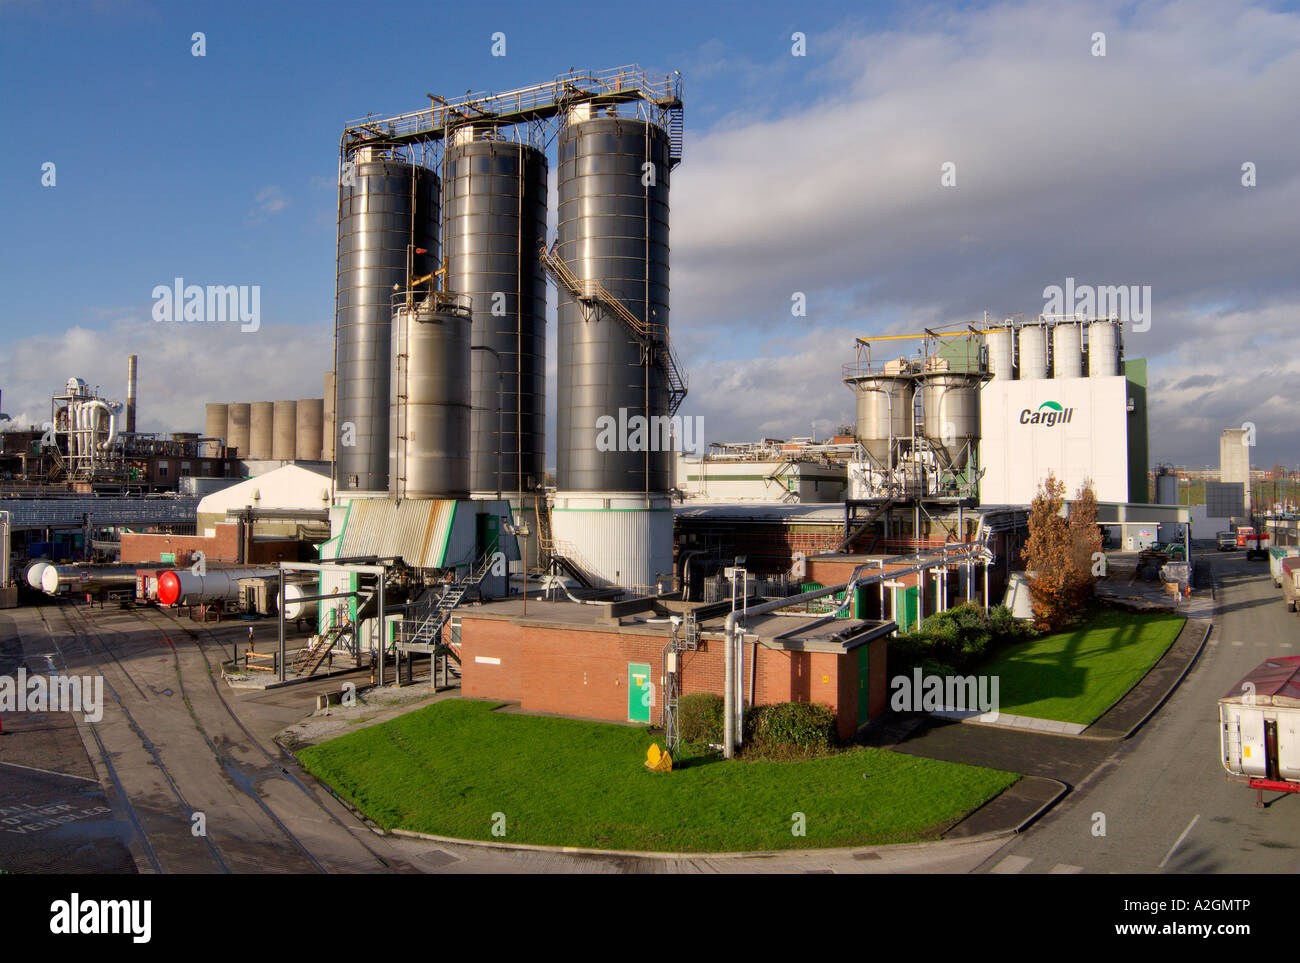 Cargill, formerly Cerestar, in Old Trafford Manchester UK. Food processors Stock Photo